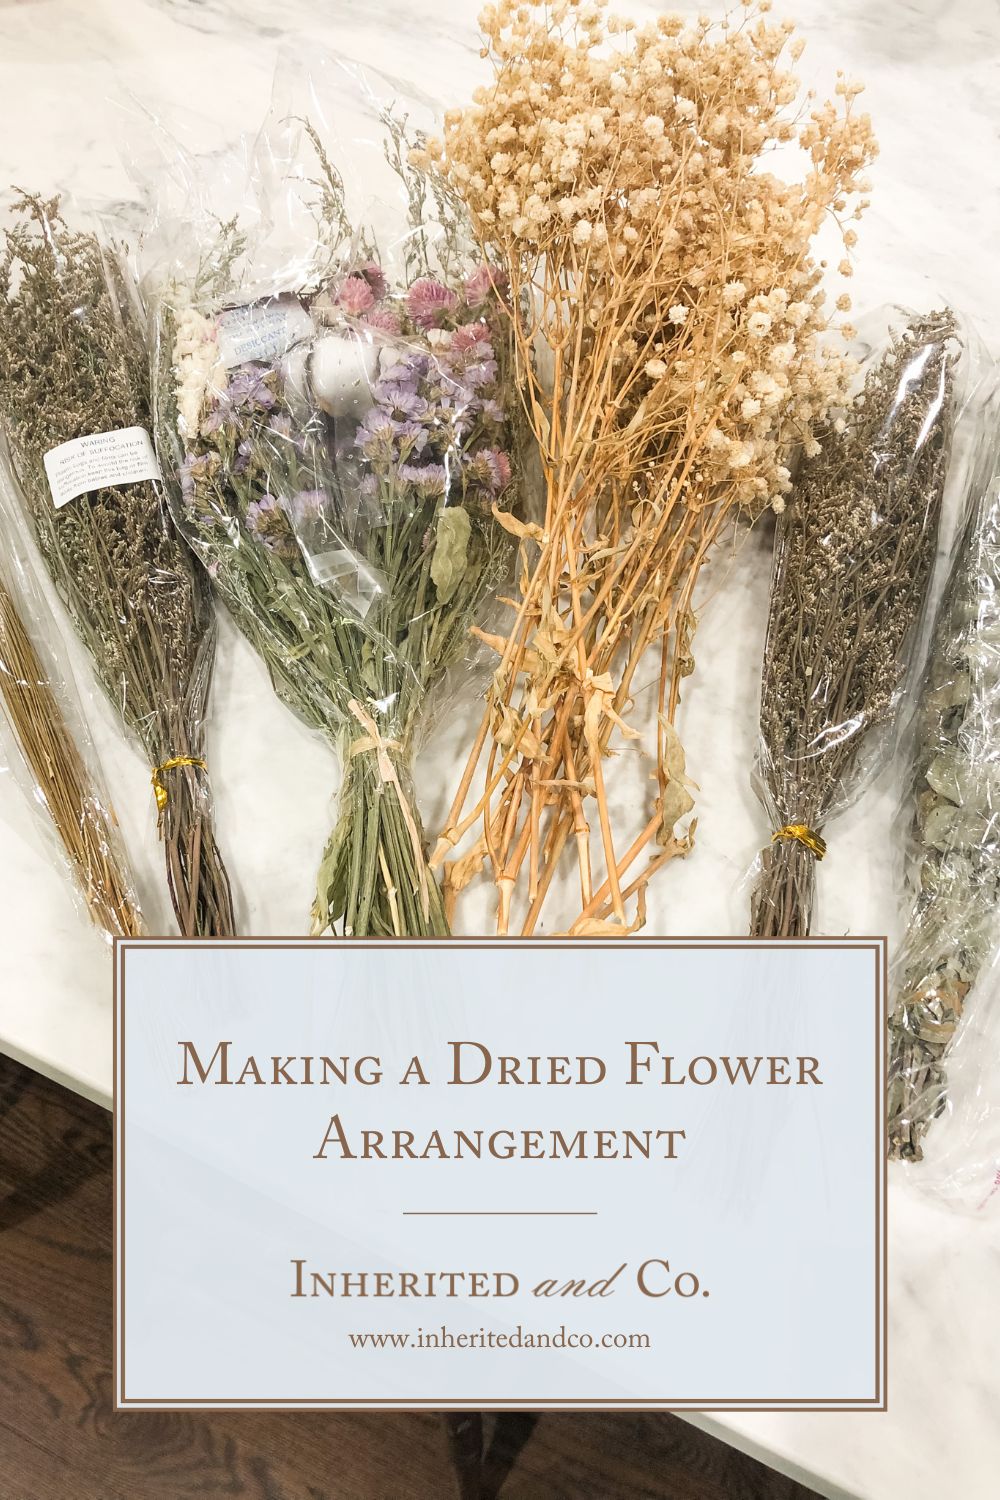 graphic with dried flower bundles on a marble countertop with a pale blue box that reads "Making a Dried Flower Arrangement Inherited and Co."